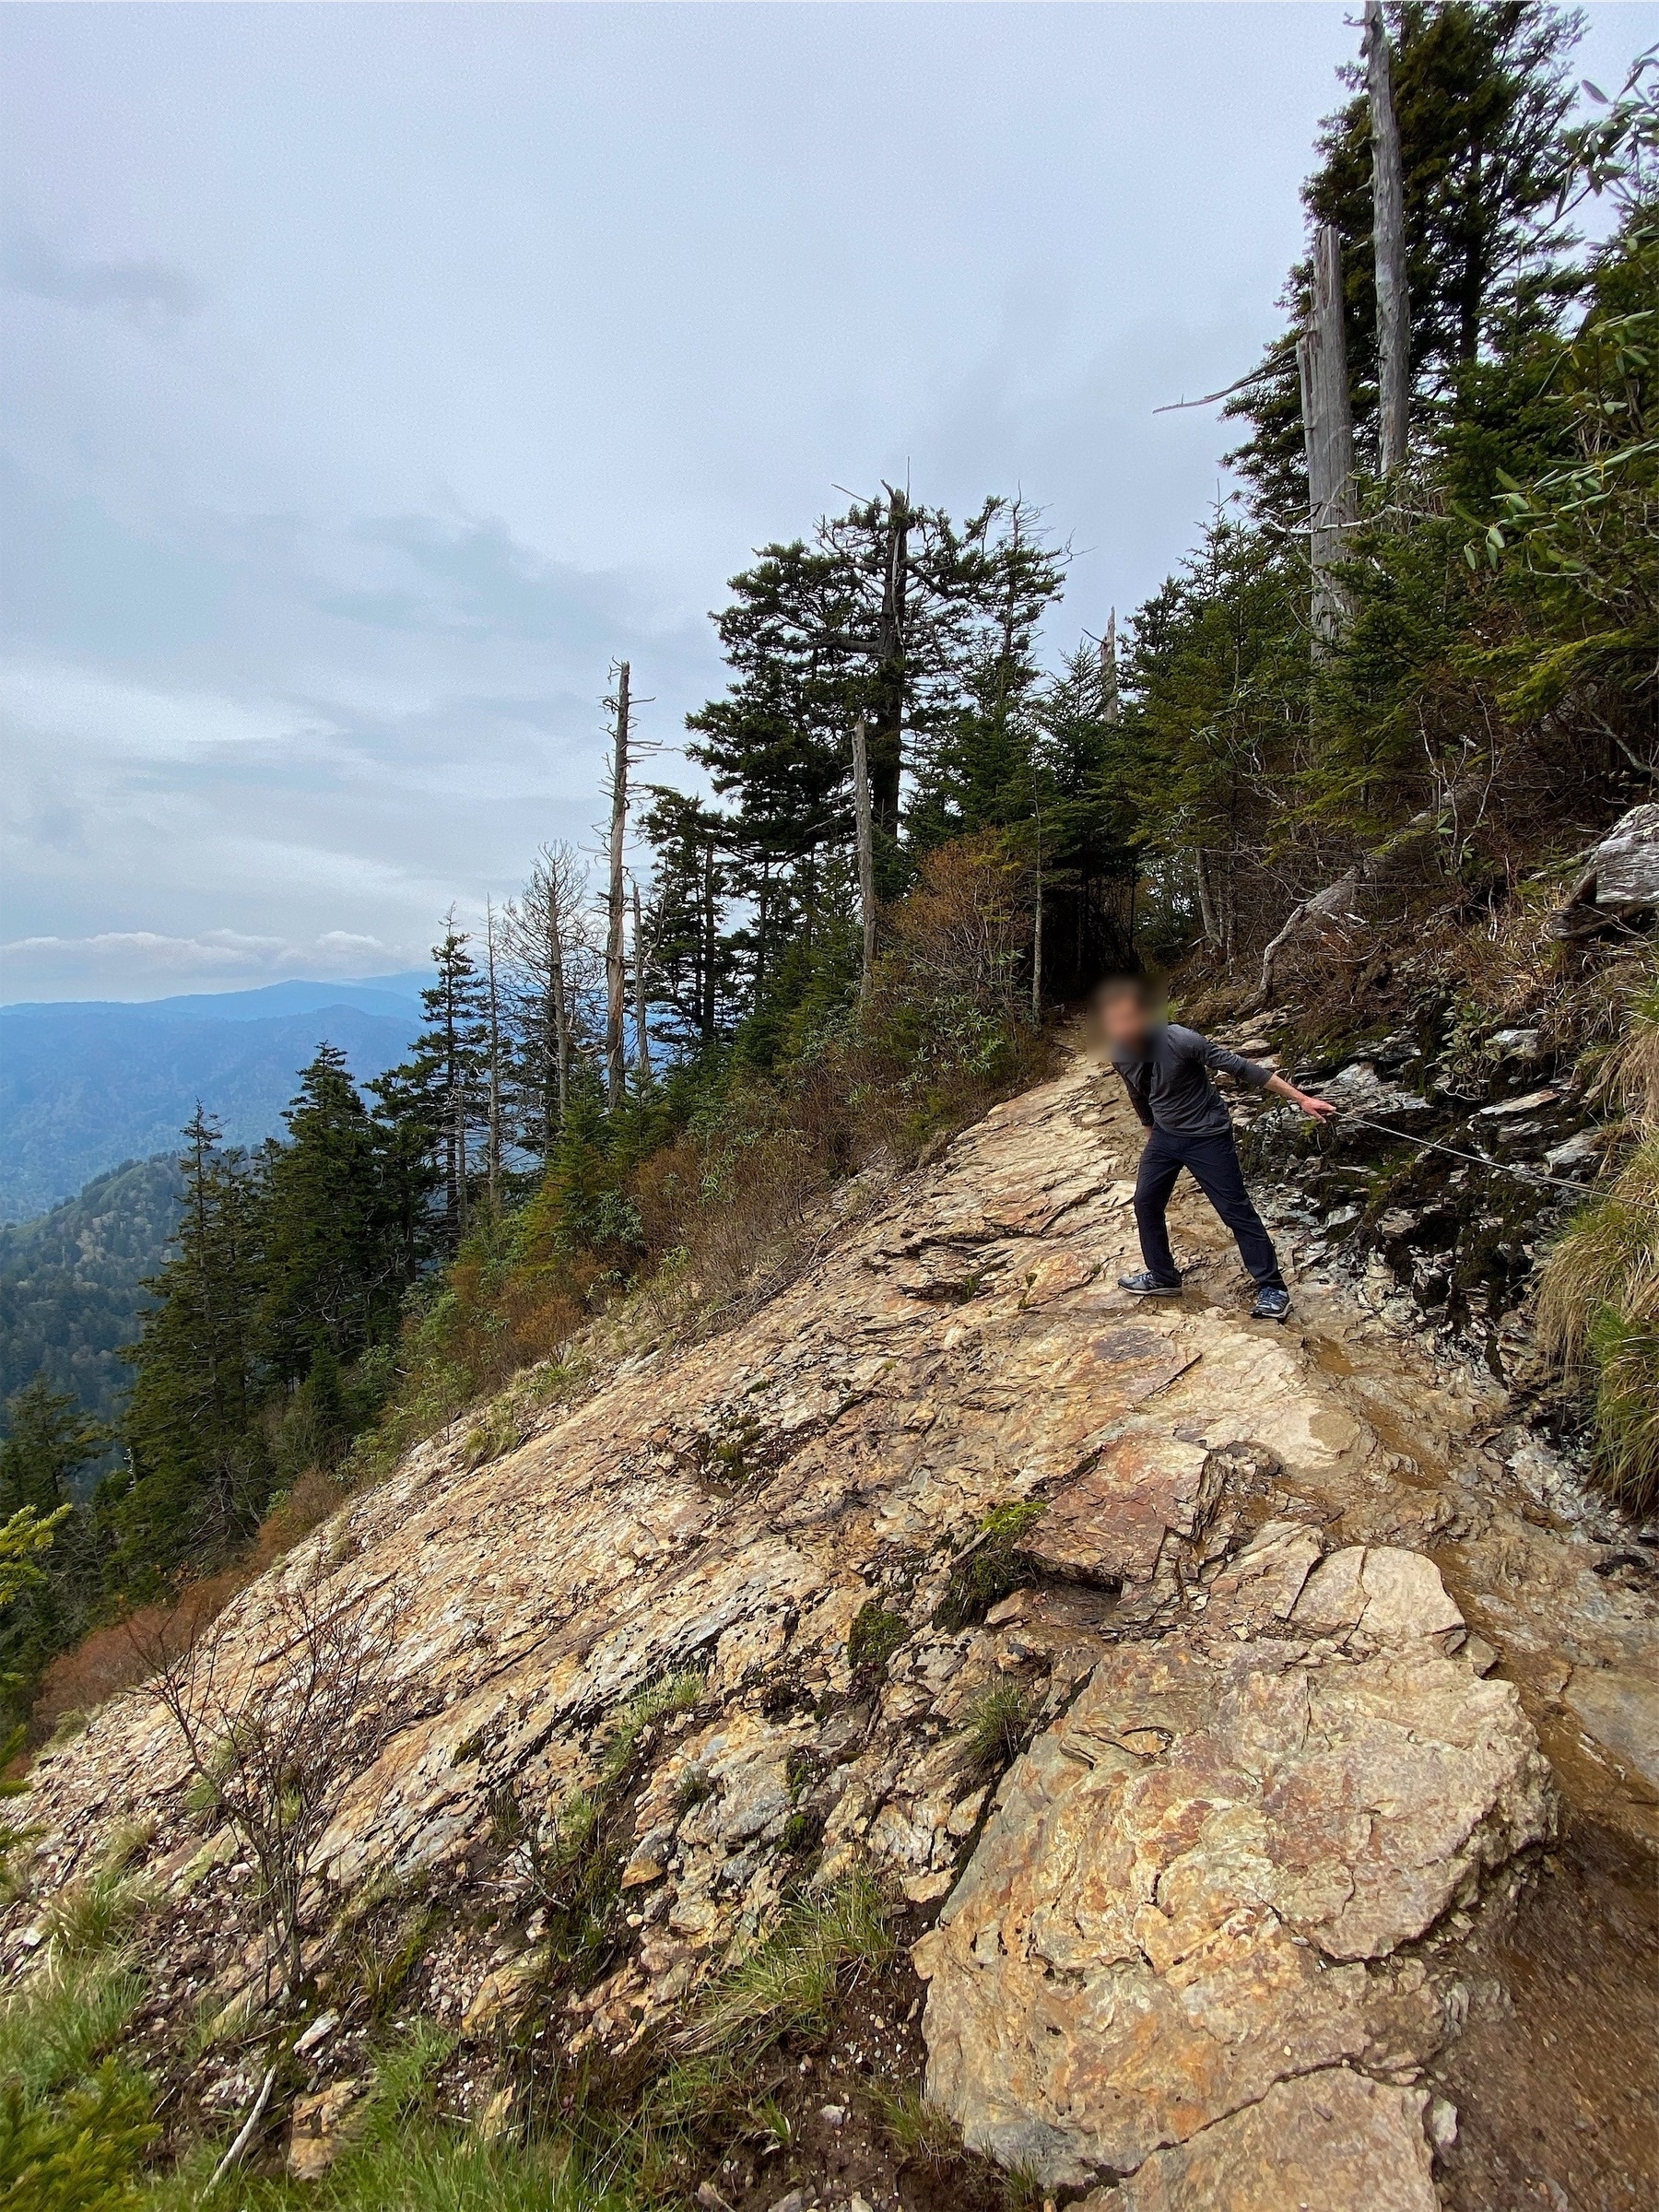 Person holding onto wire attached to to the rock behind him, on a trail in the mountains, leaning over the steep hillside off the trail. Trees in the back of the photo, long with the clouds and a view of distant mountains / hills.